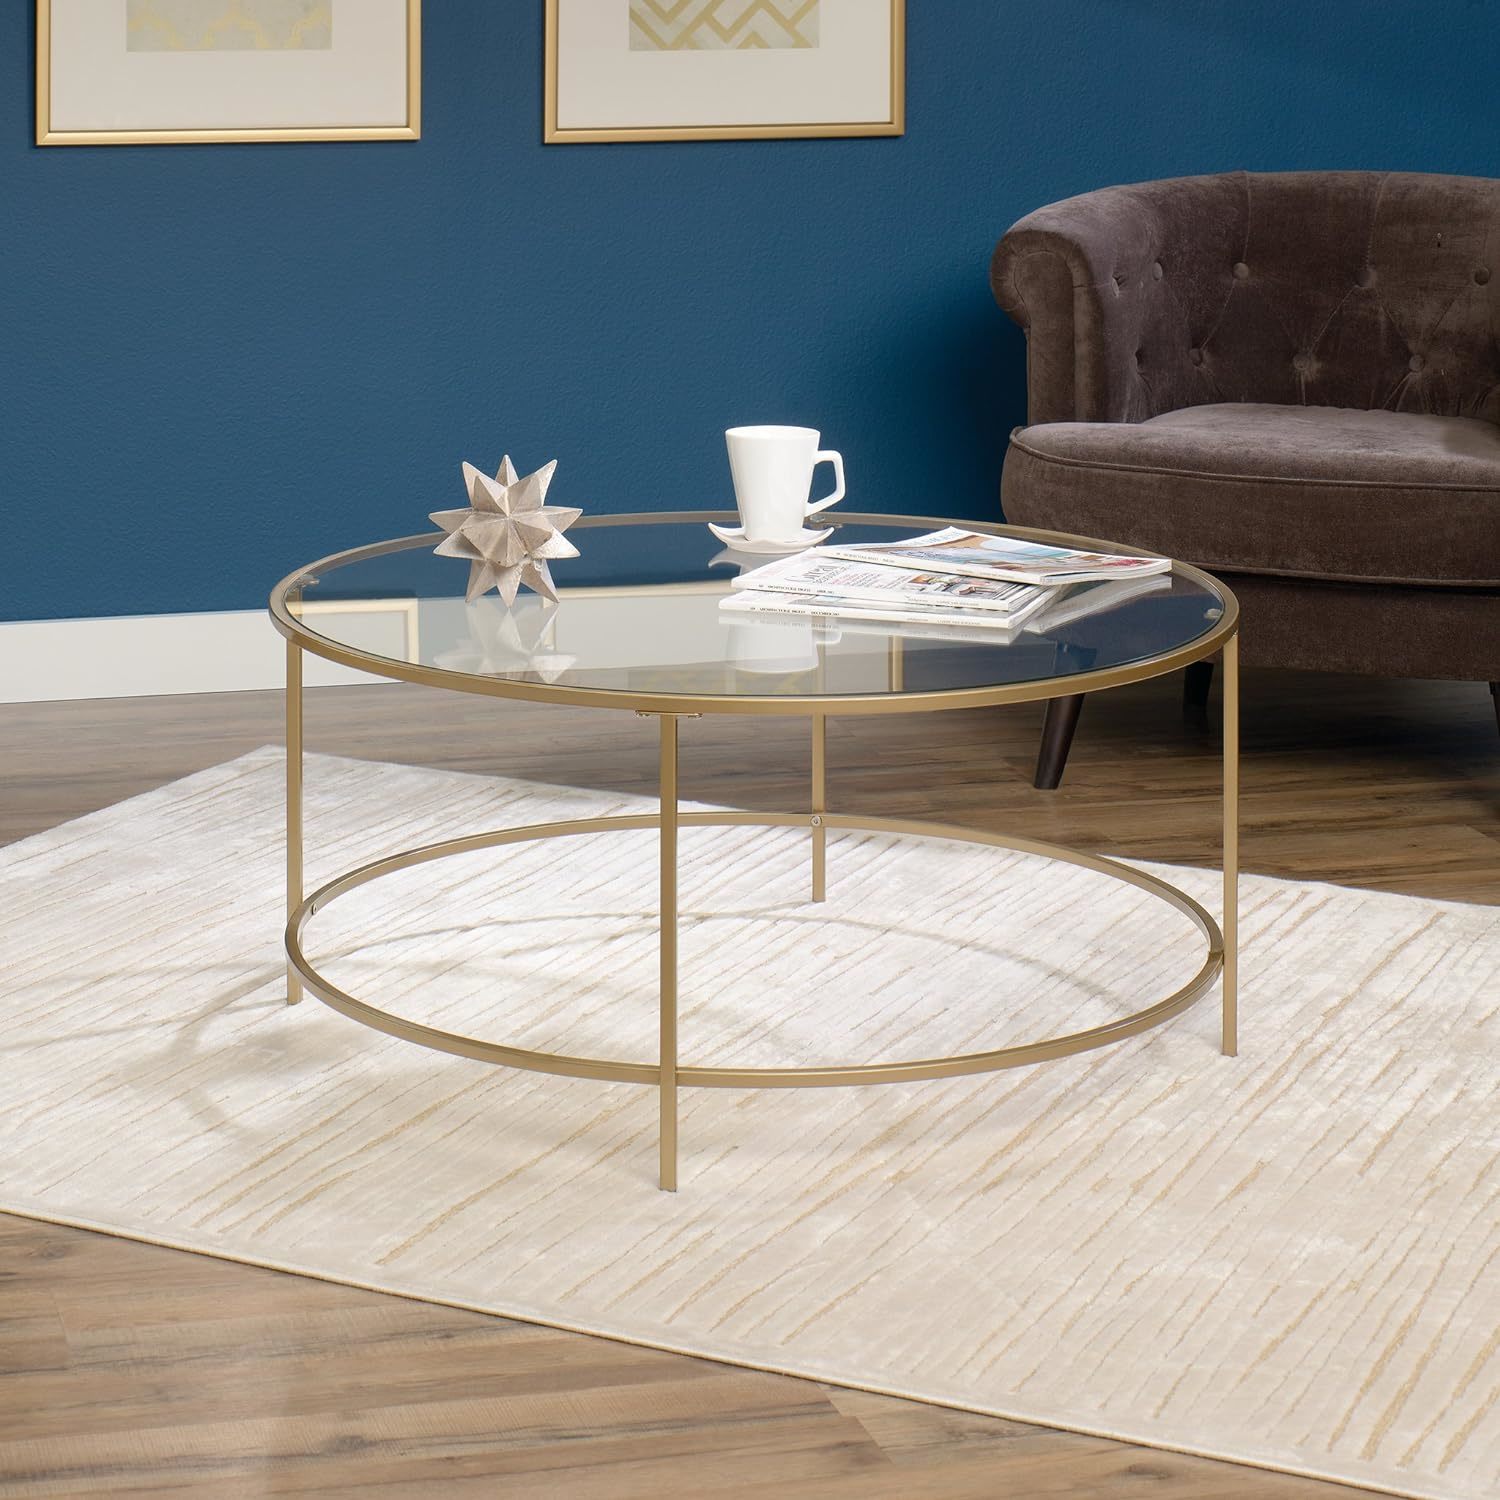 Round Int Lux Coffee Table With Glass Top And Gold Finish, Sauder 417830. - $180.95